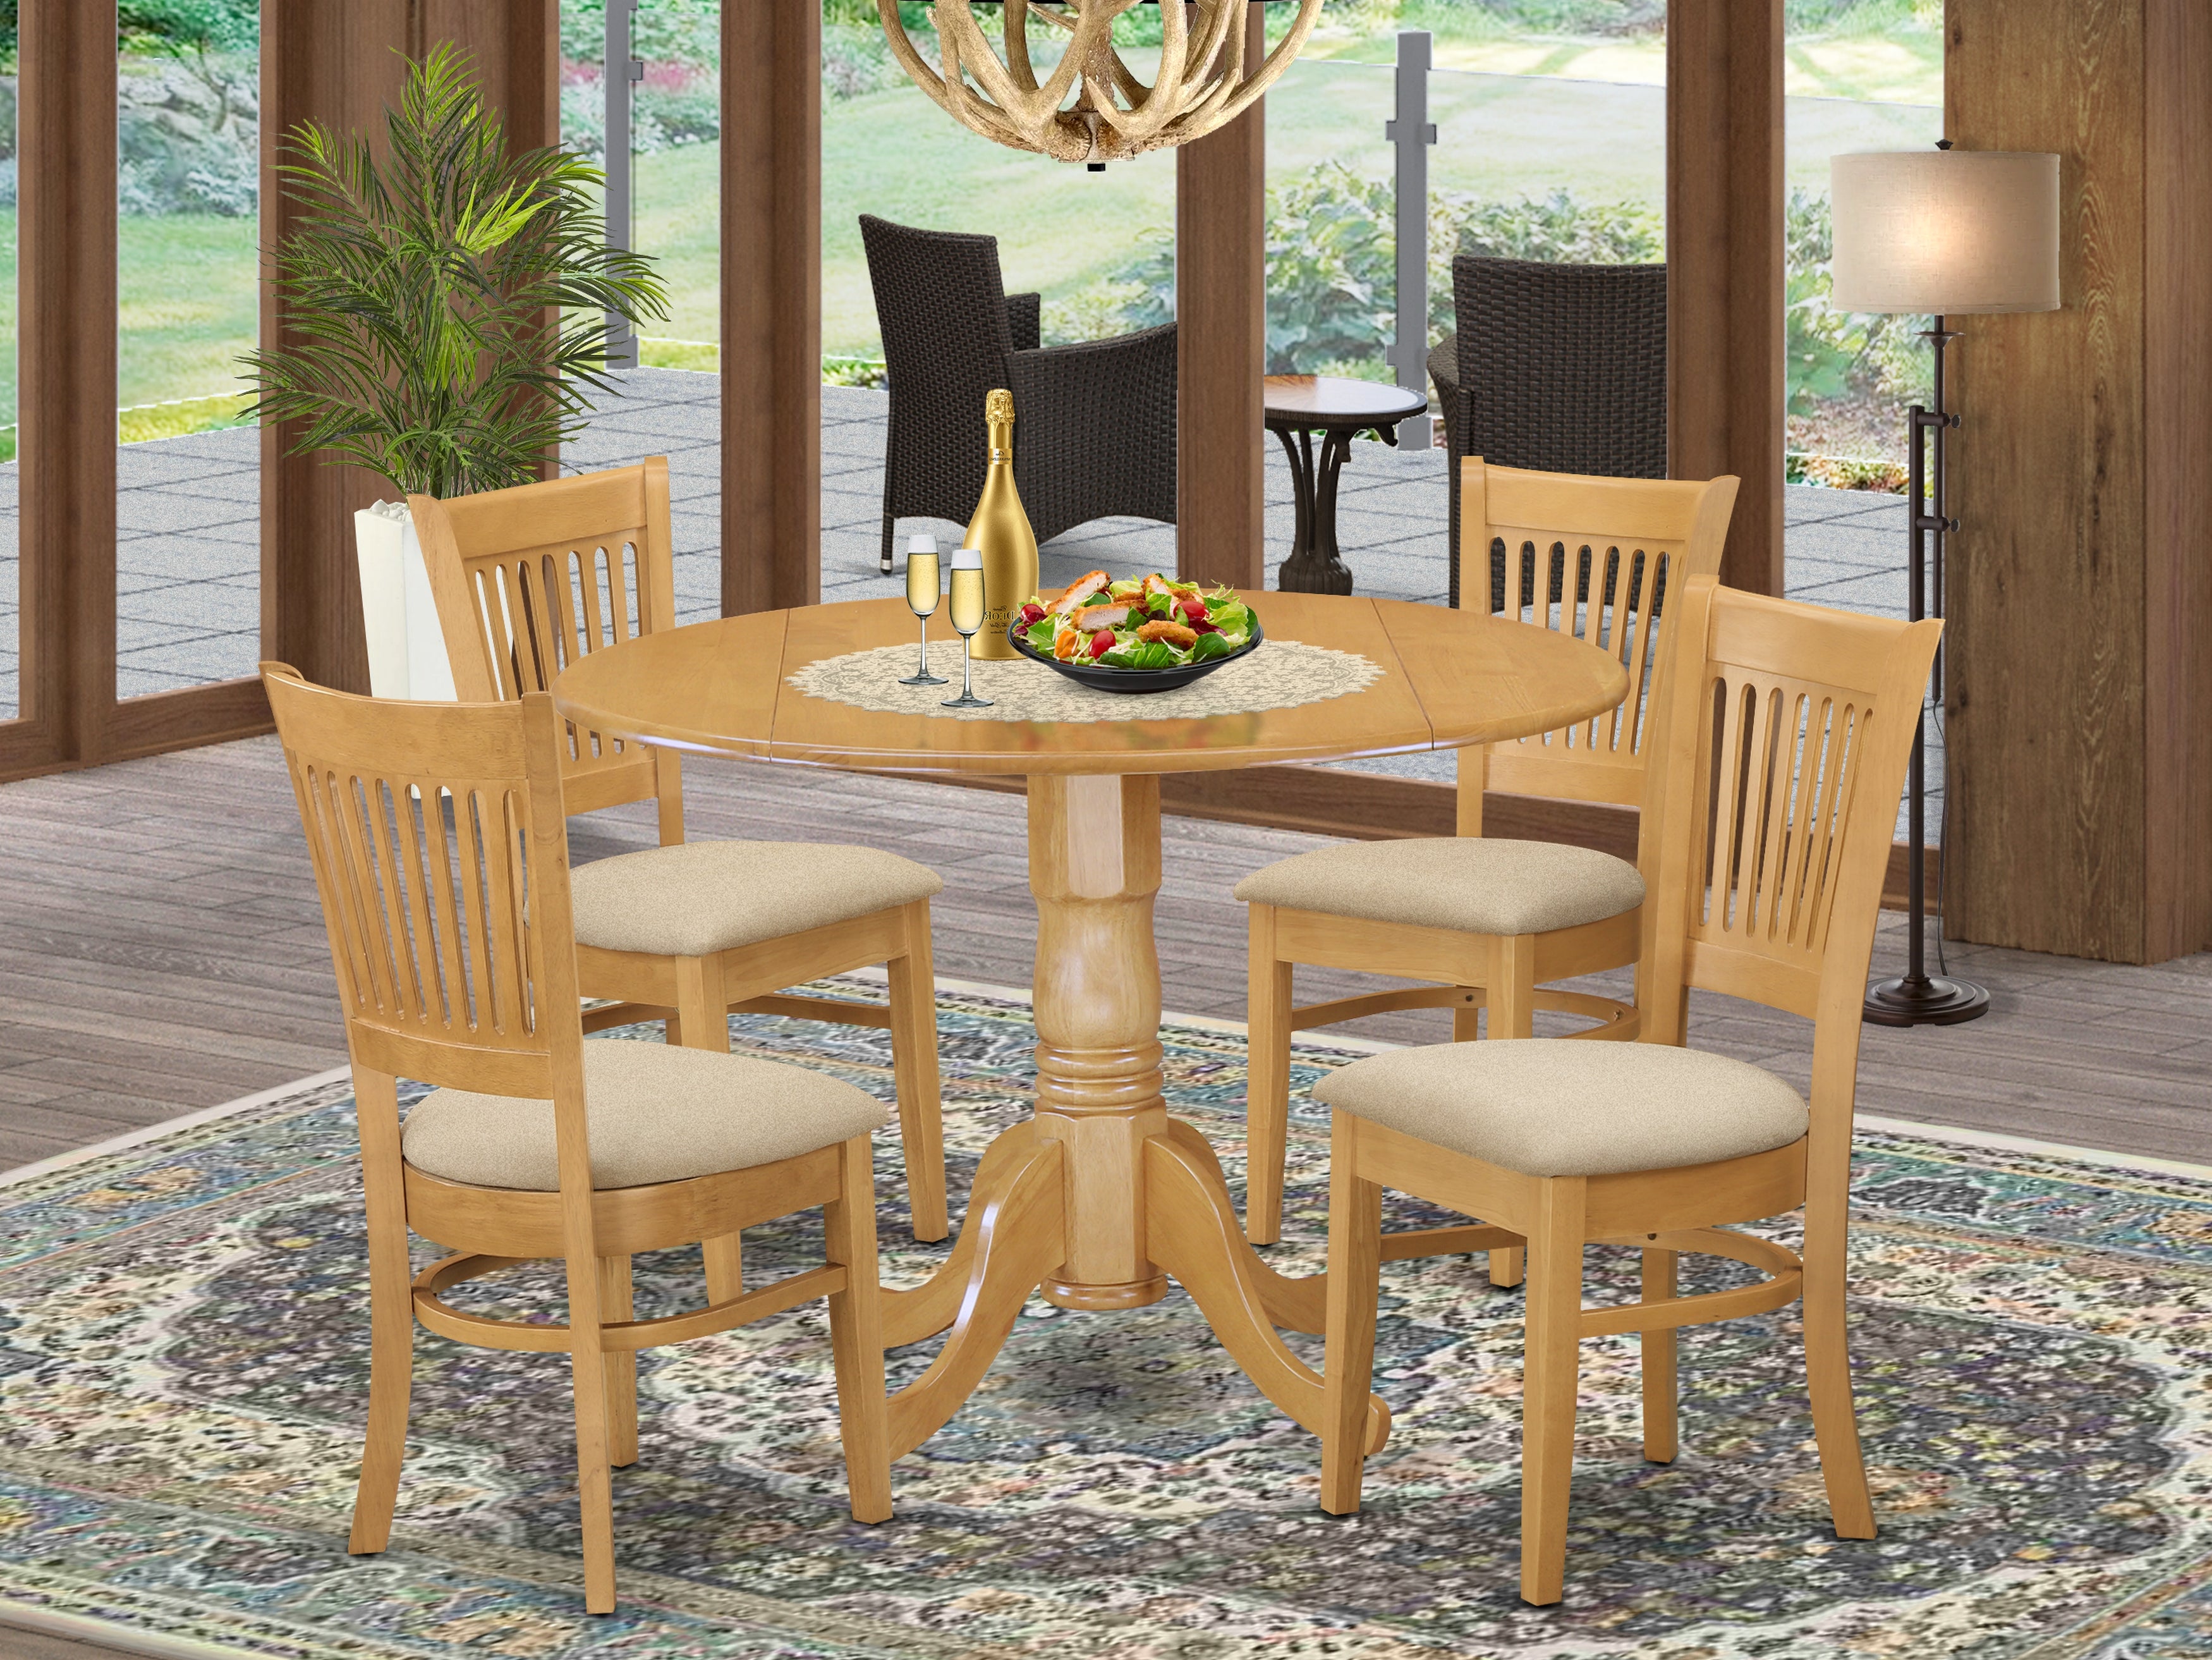 DLVA5-OAK-C 5 Pc small Kitchen Table set-drop leaf Table and 4 dinette Chairs